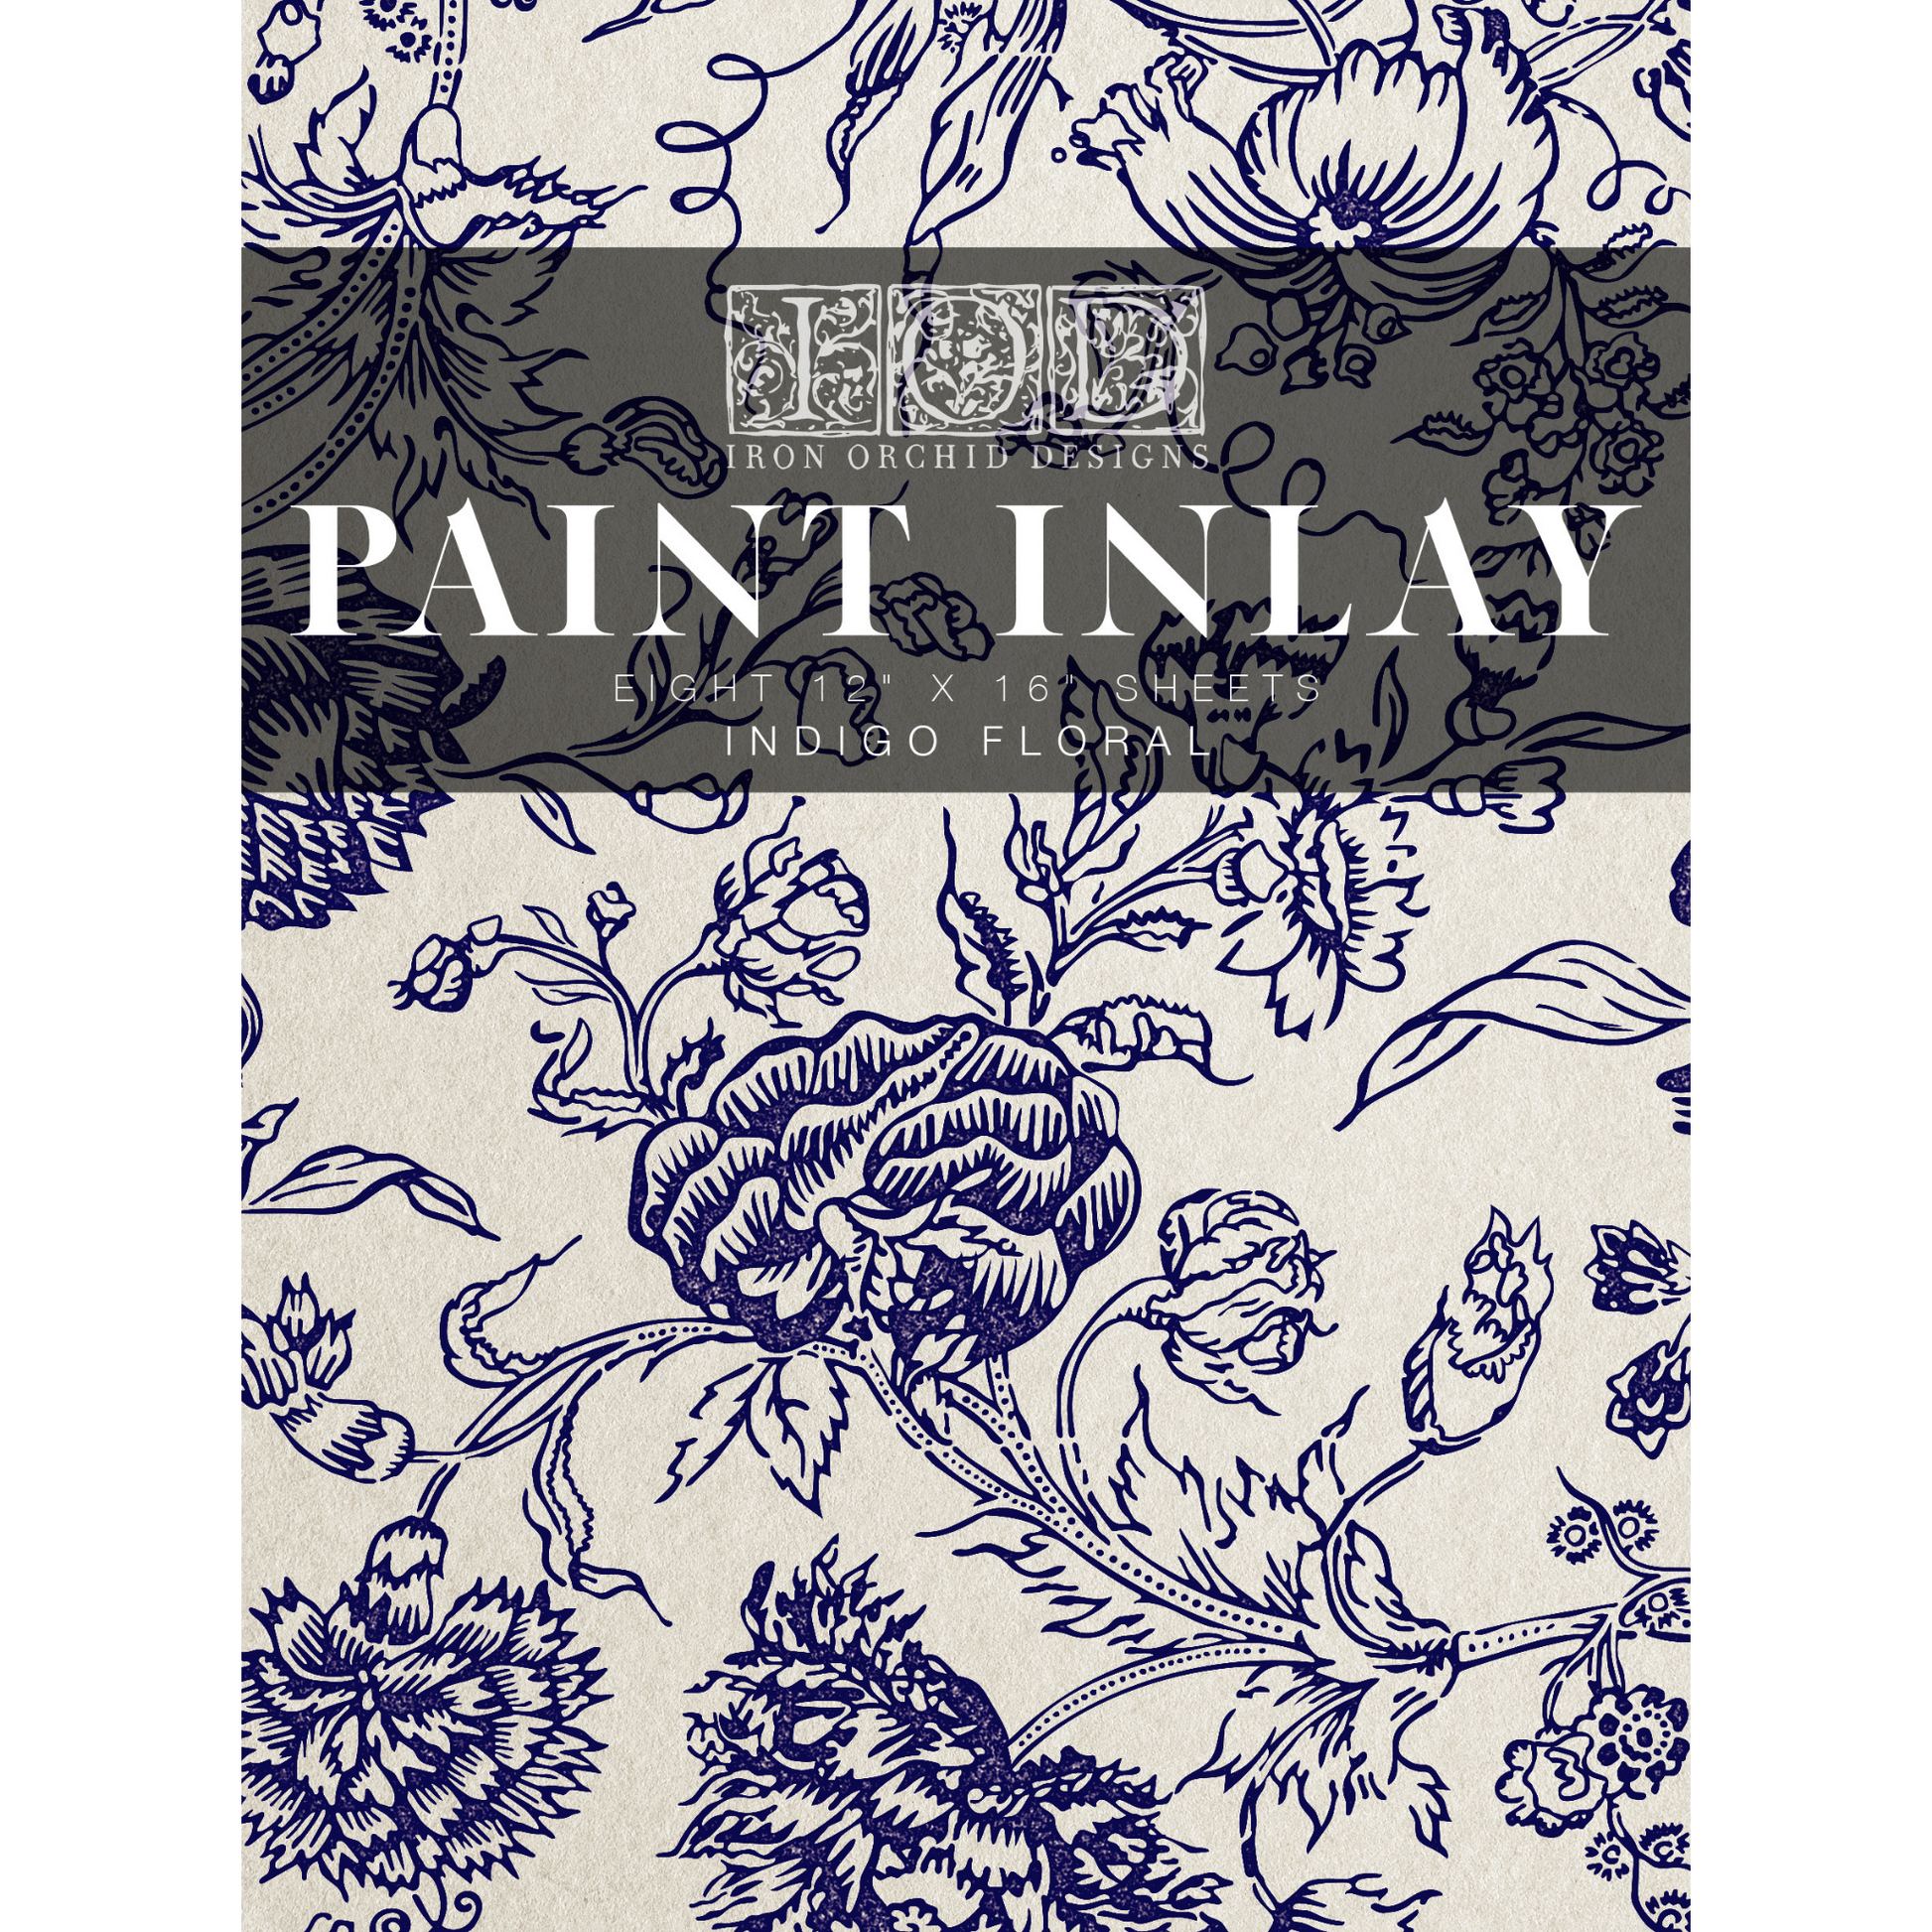 IOD Indigo Floral Paint Inlay product cover by Iron Orchid Designs.  Contains eight 12" x 16" sheets. in navy and white florals. Available at Milton's Daughter.